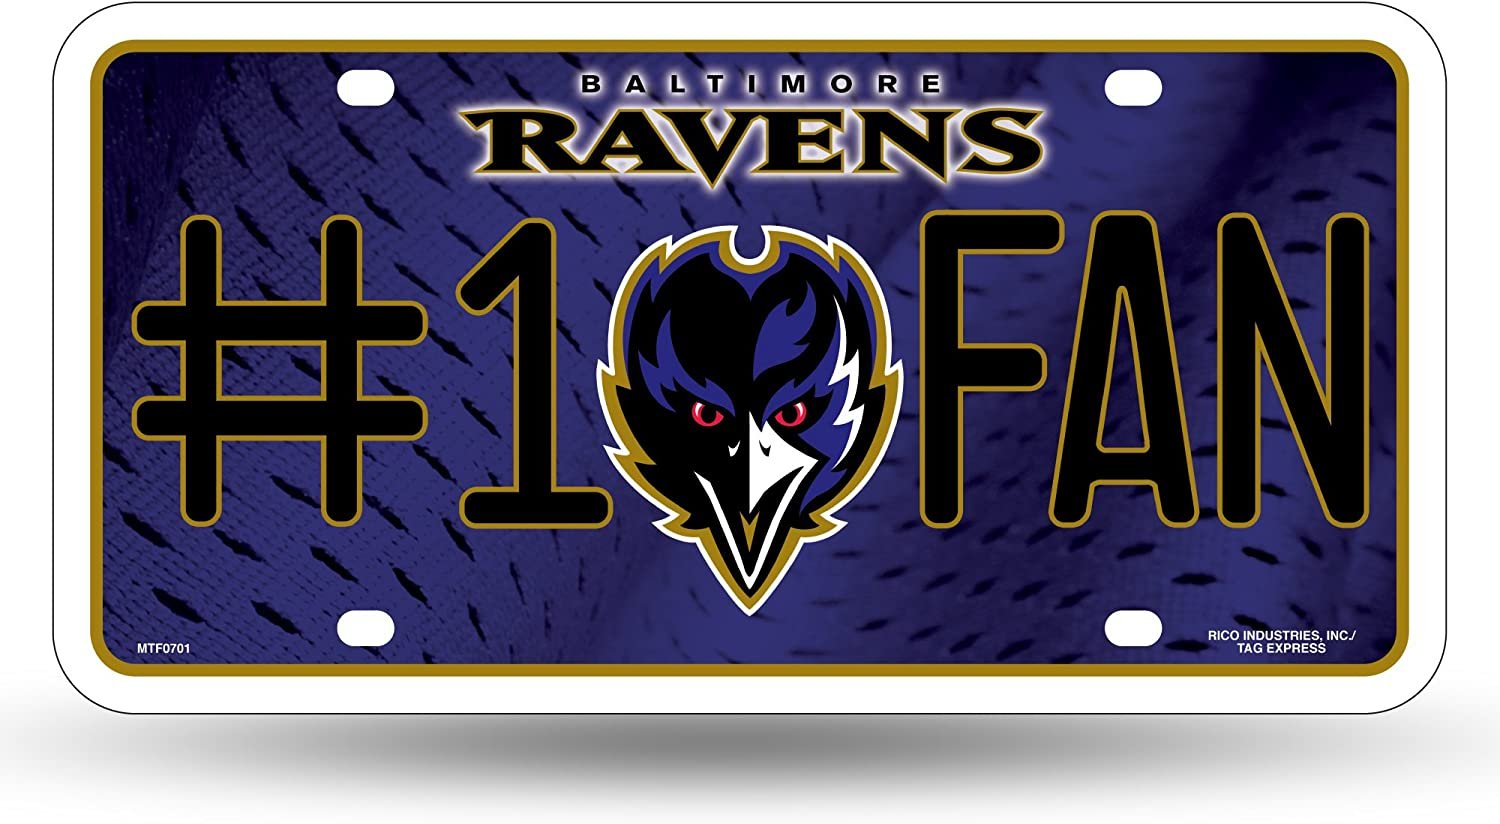 Baltimore Ravens #1 Fan Metal License Plate Tag Aluminum Novelty 12x6 Inch